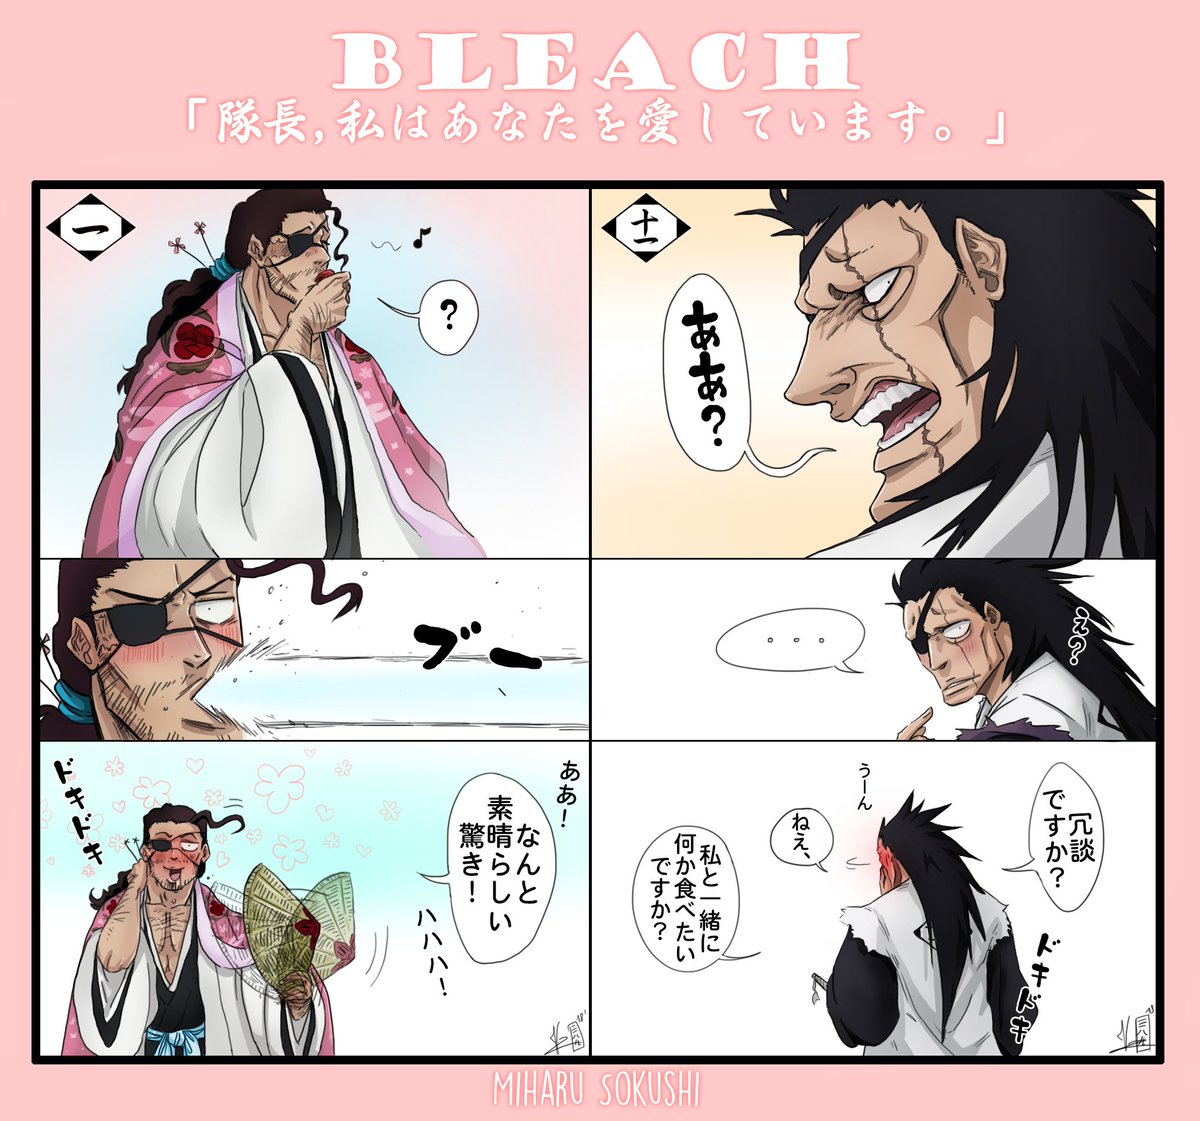 Miharu Sokushi Bleach ブリーチ 京楽 更木 剣八 Love 愛 Kenpachi Kyoraku I Draw Them Last Year What If We Declared Our Love To Our Favorite Captain In Bleach Here The